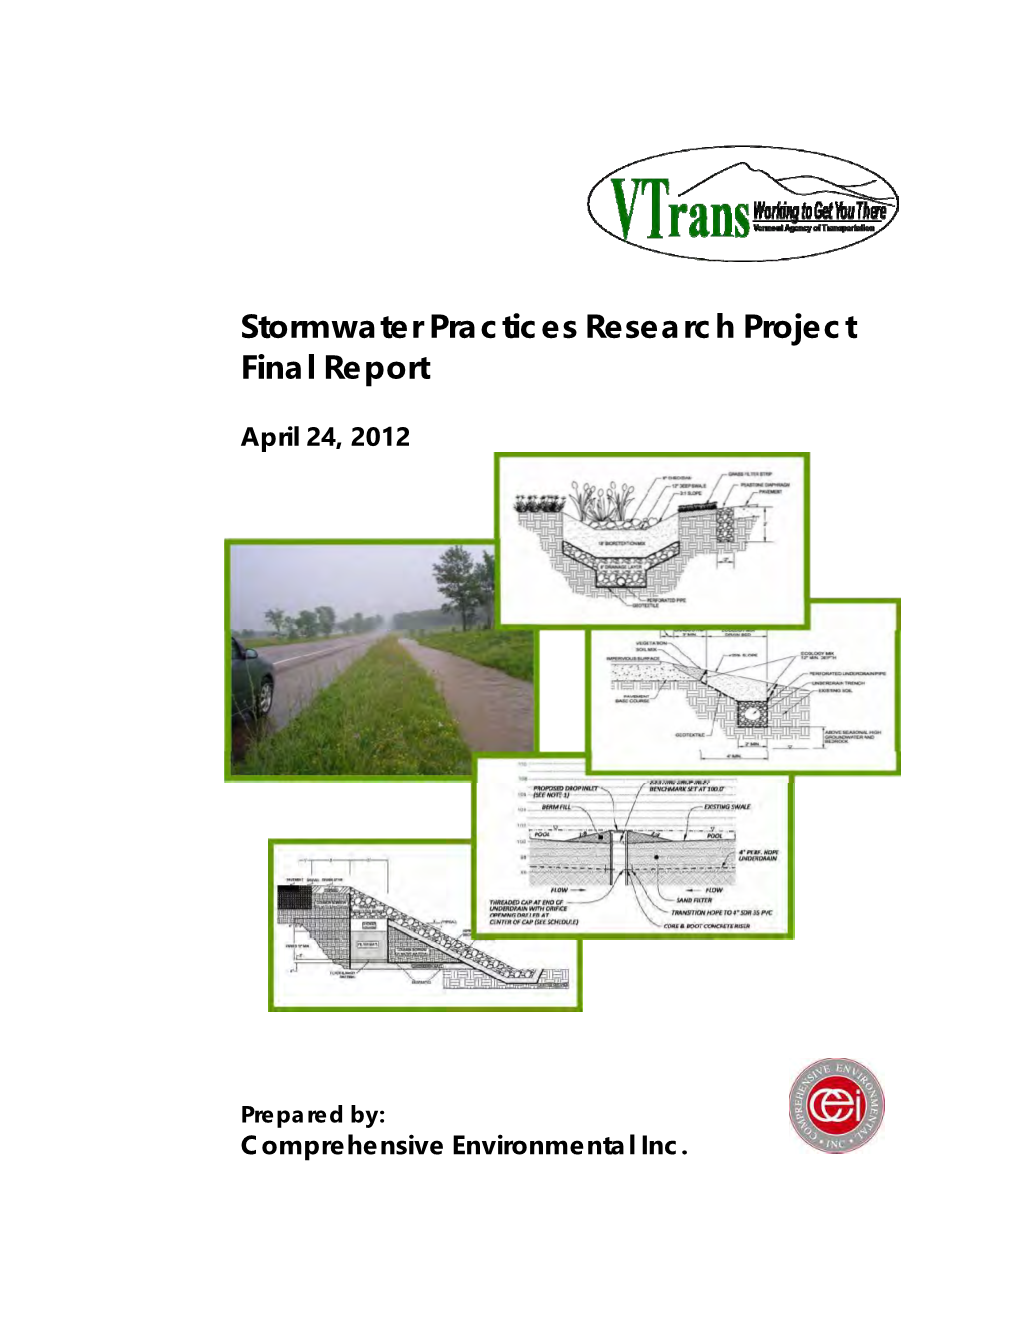 Stormwater Practices Research Project Final Report